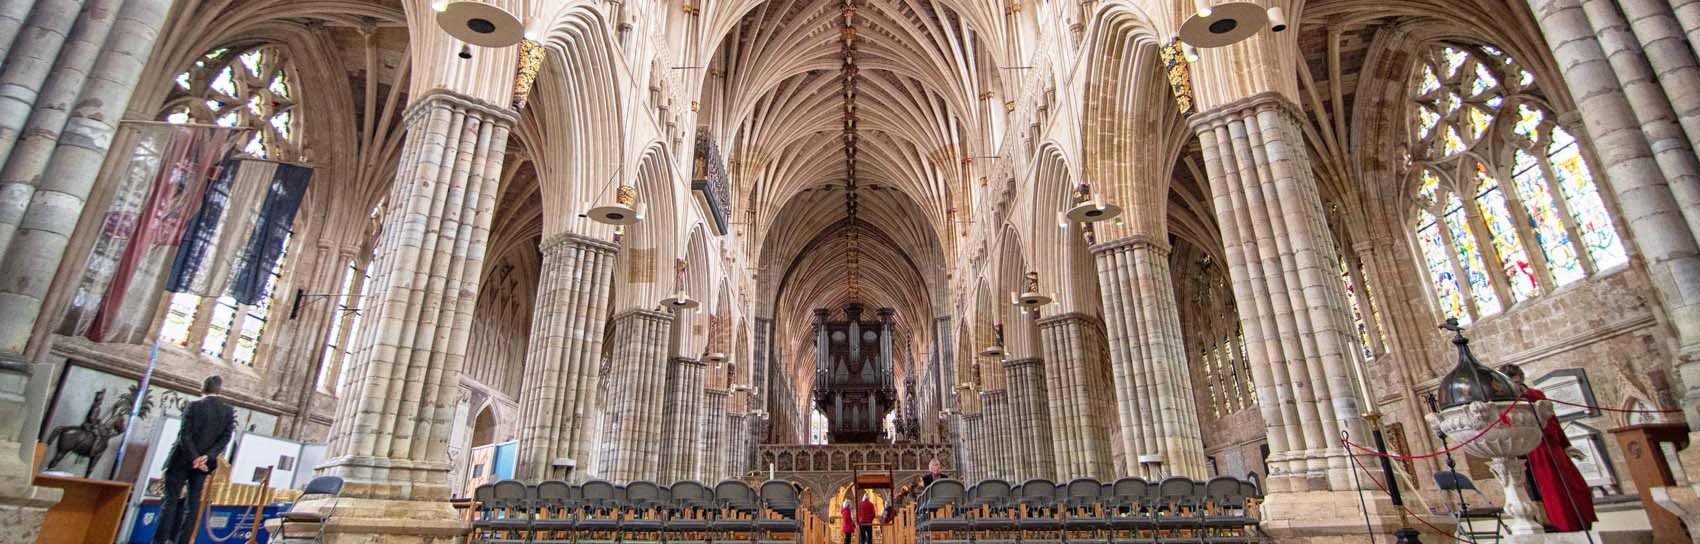 The interior of Exeter Cathedral. Photograph by ALEX GRAEME